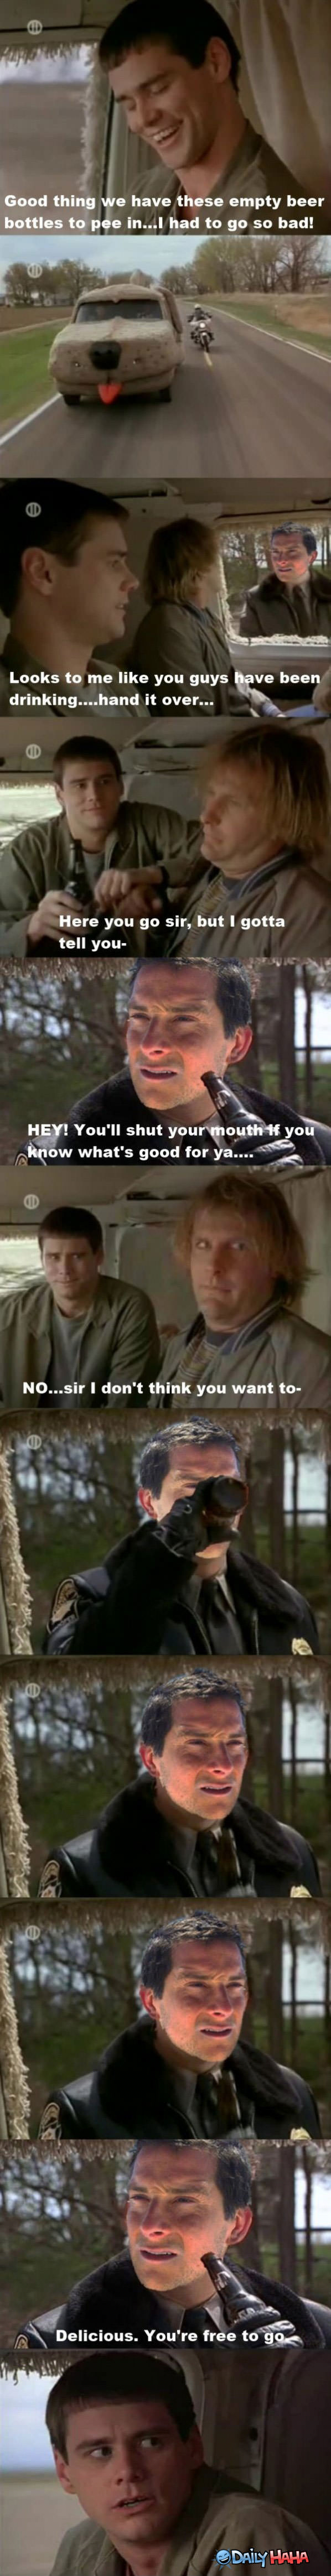 Dumb and Dumber funny picture